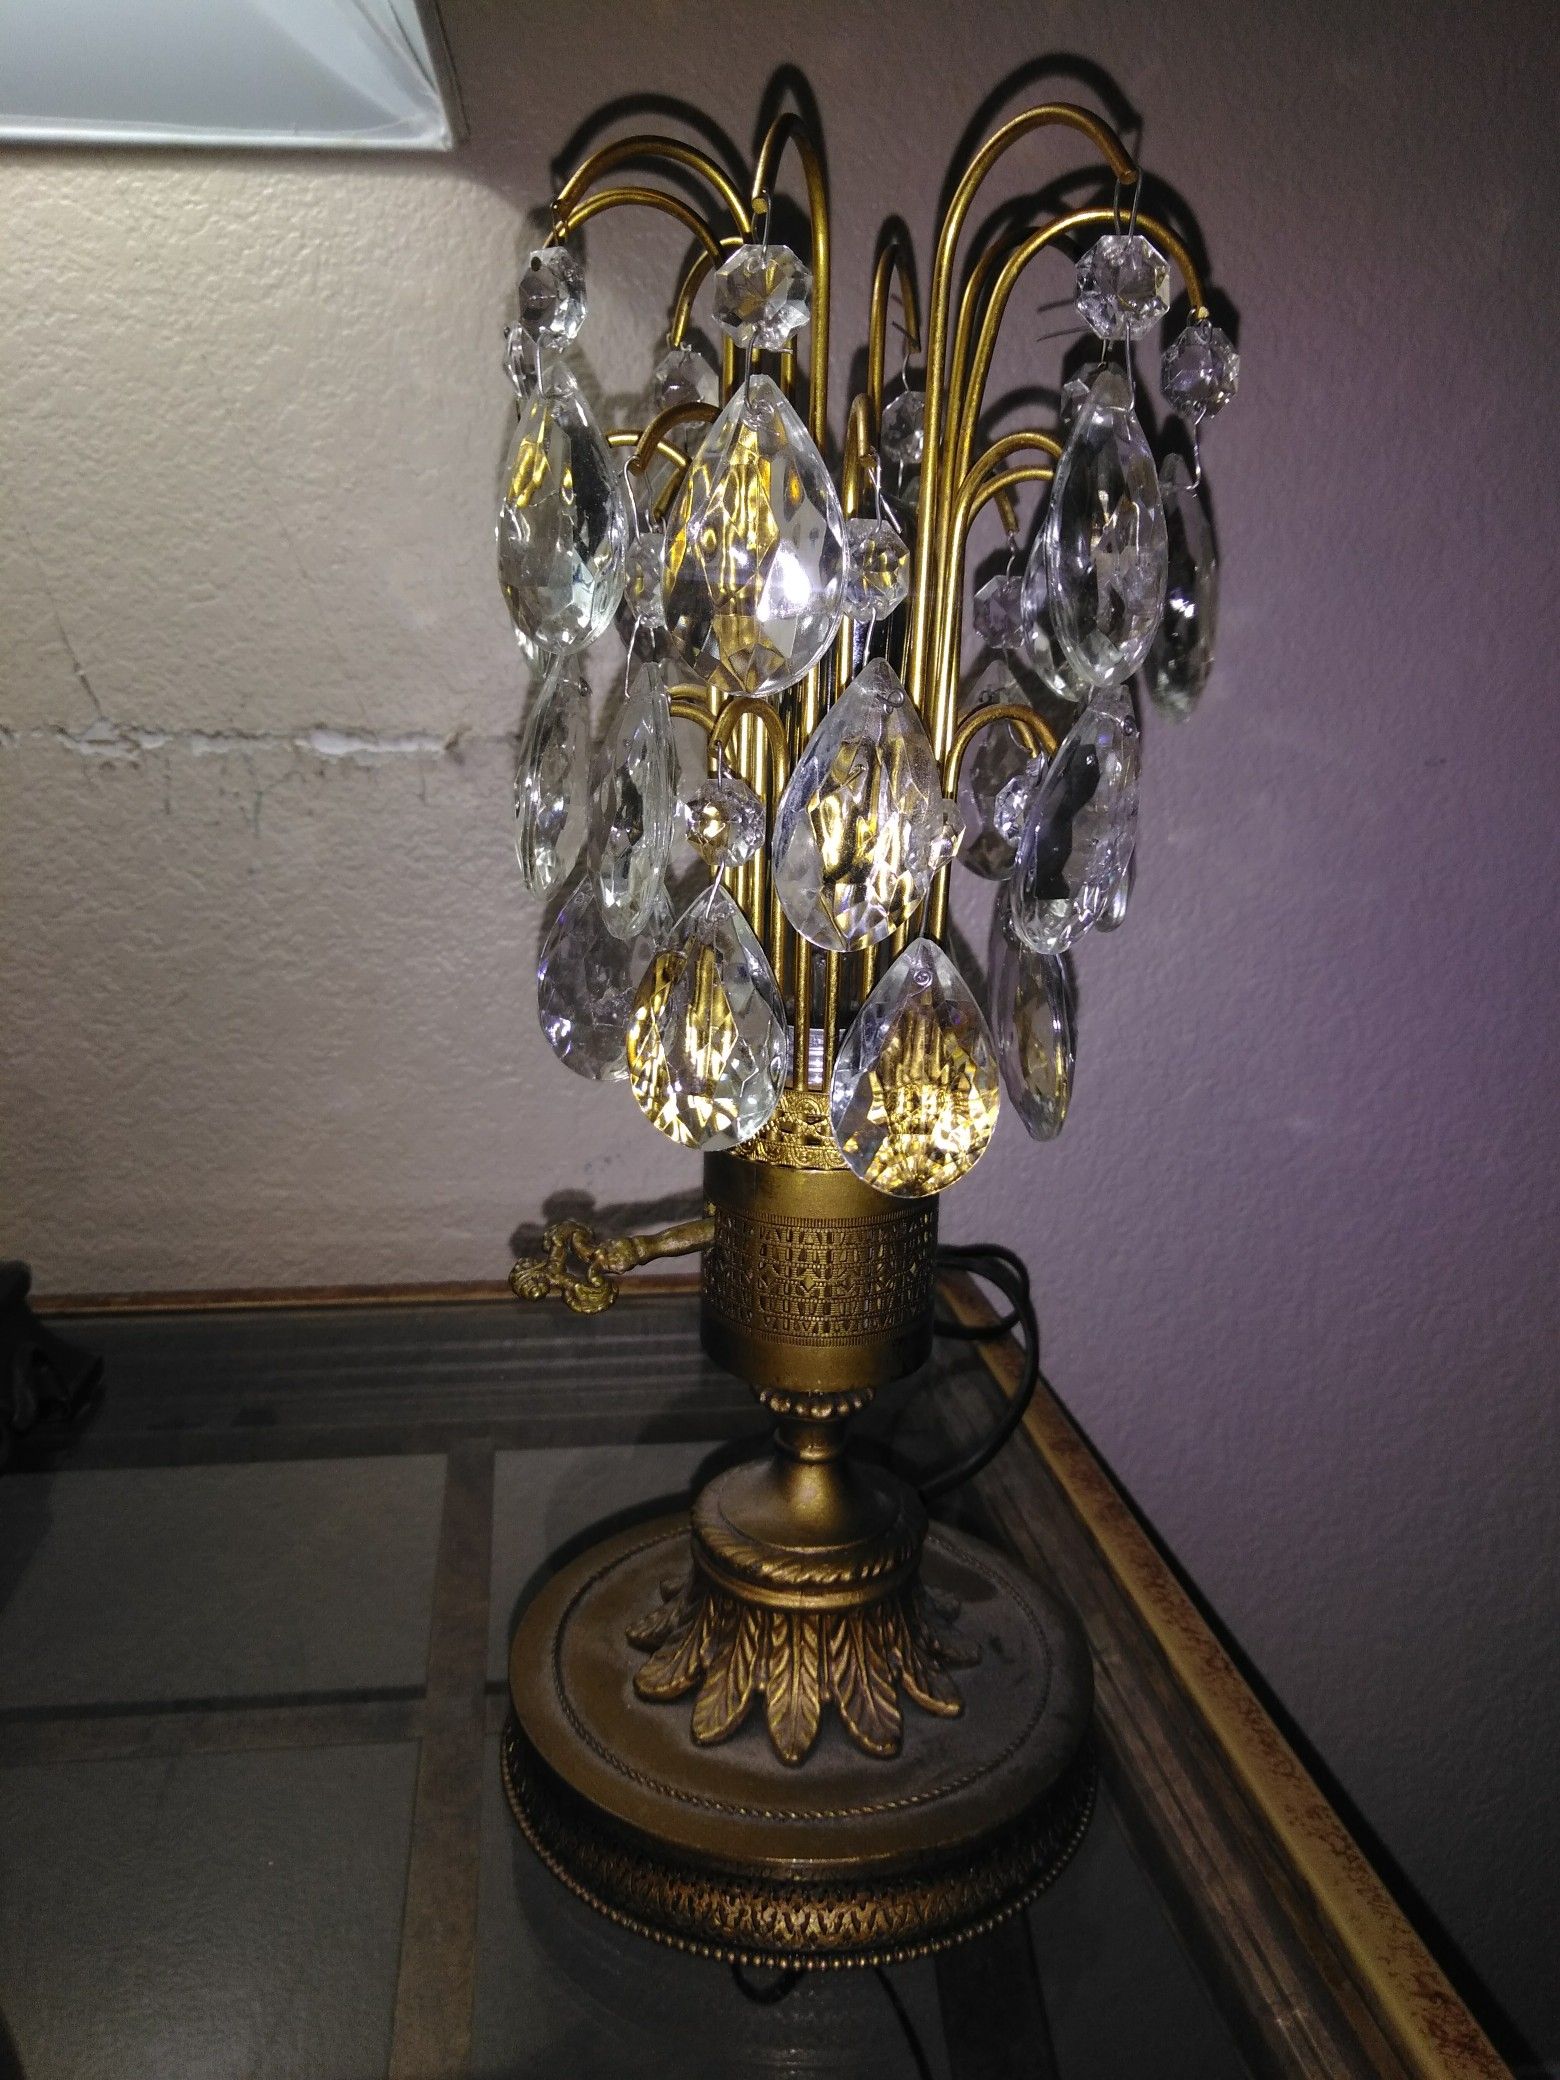 BEAUTIFUL ORNATE VINTAGE BRASS & CRYSTAL w/ PRISMS TABLE LAMP